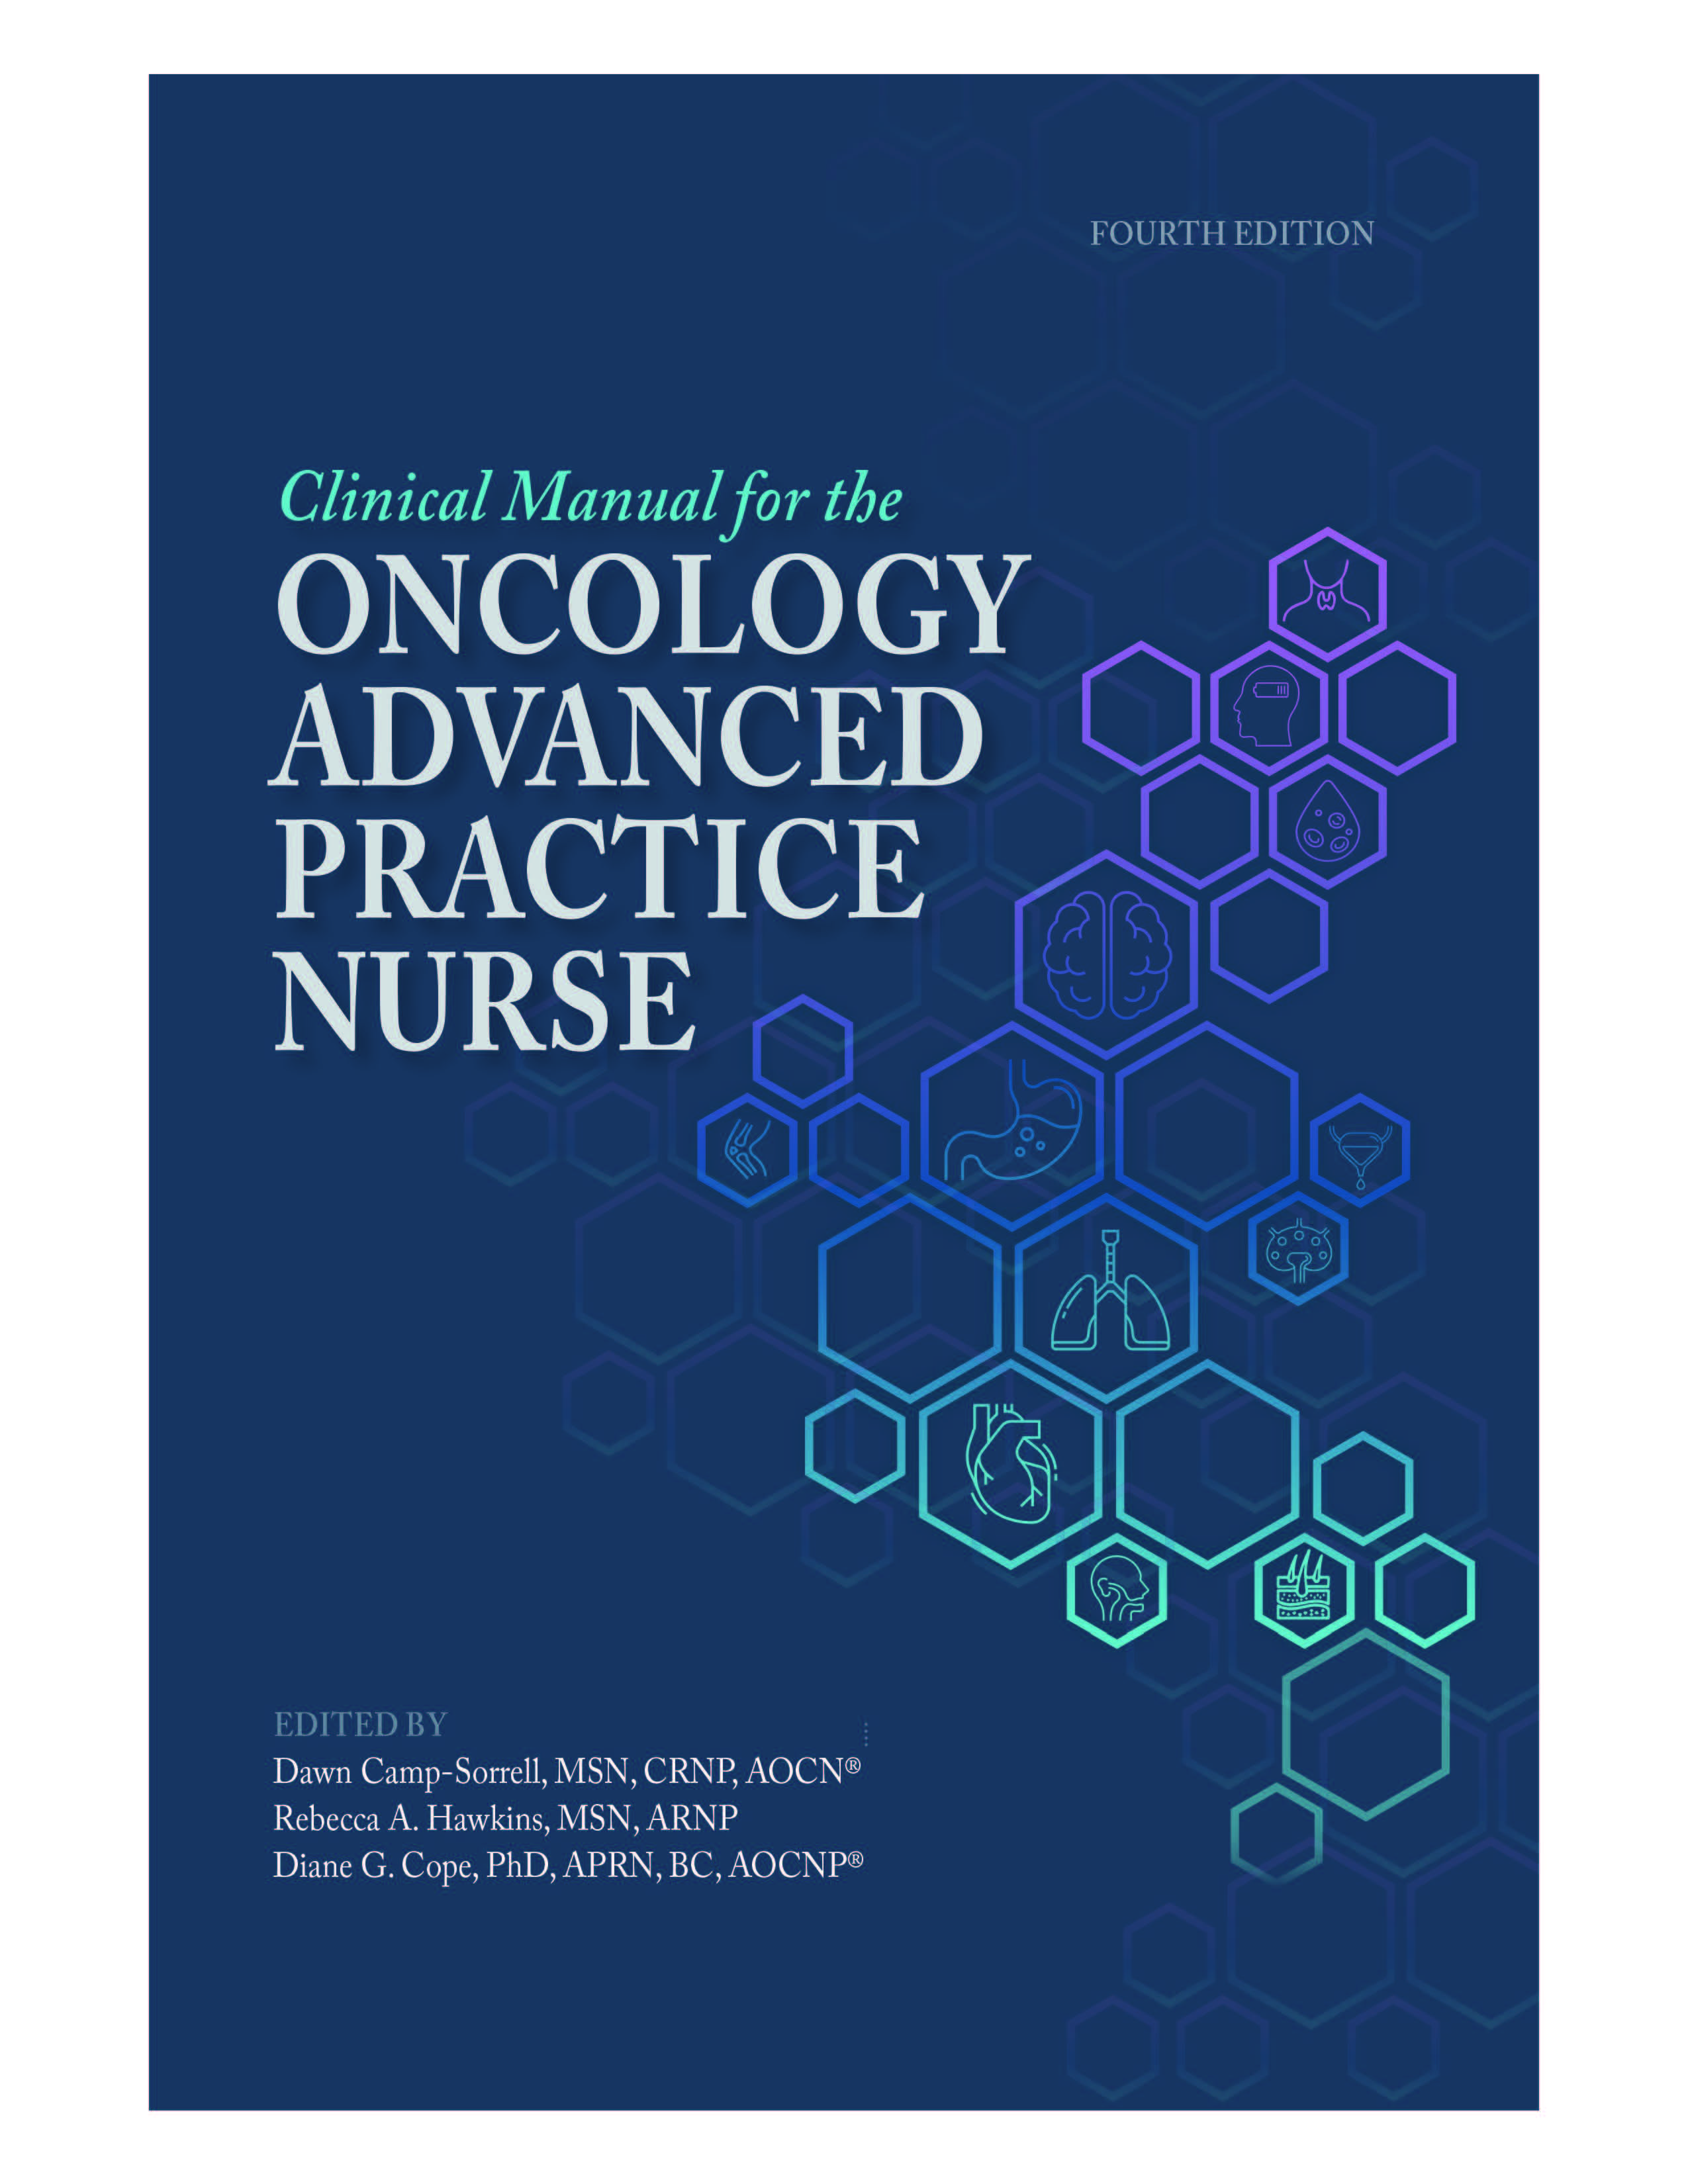 Clinical Manual for the Oncology Advanced Practice Nurse (4th edition)